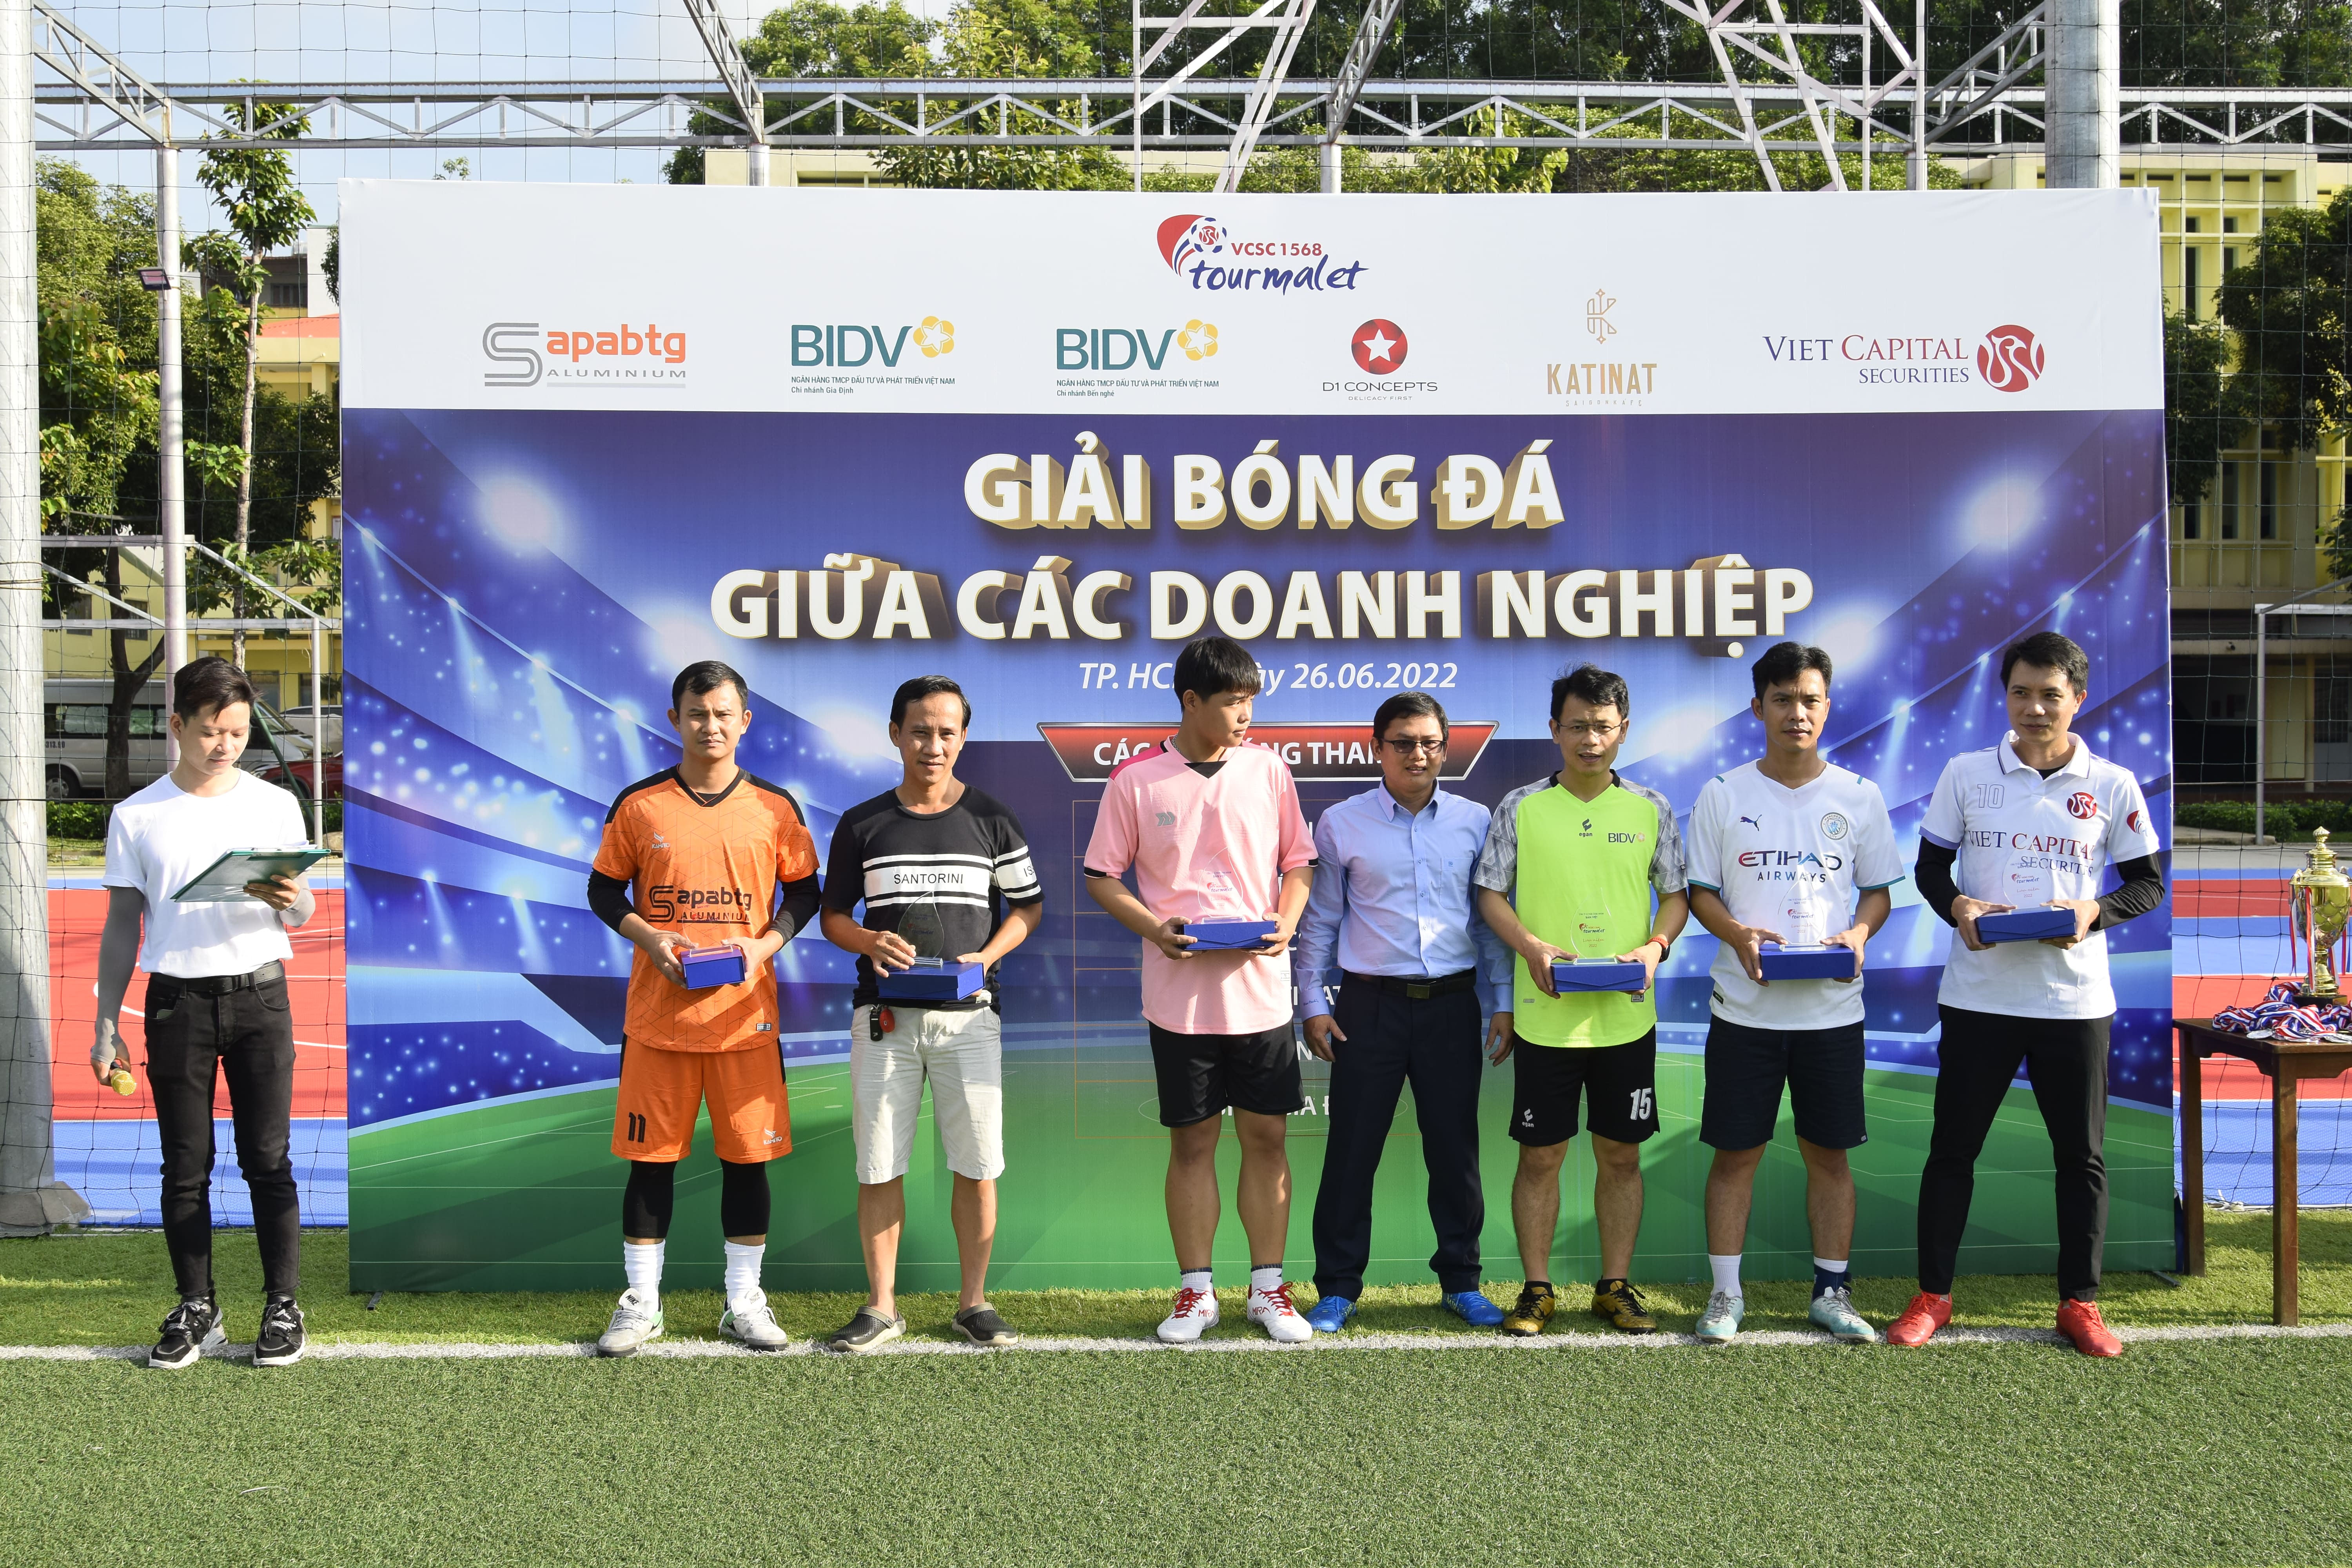 We frequently sponsor sports events for Vietcap employees.